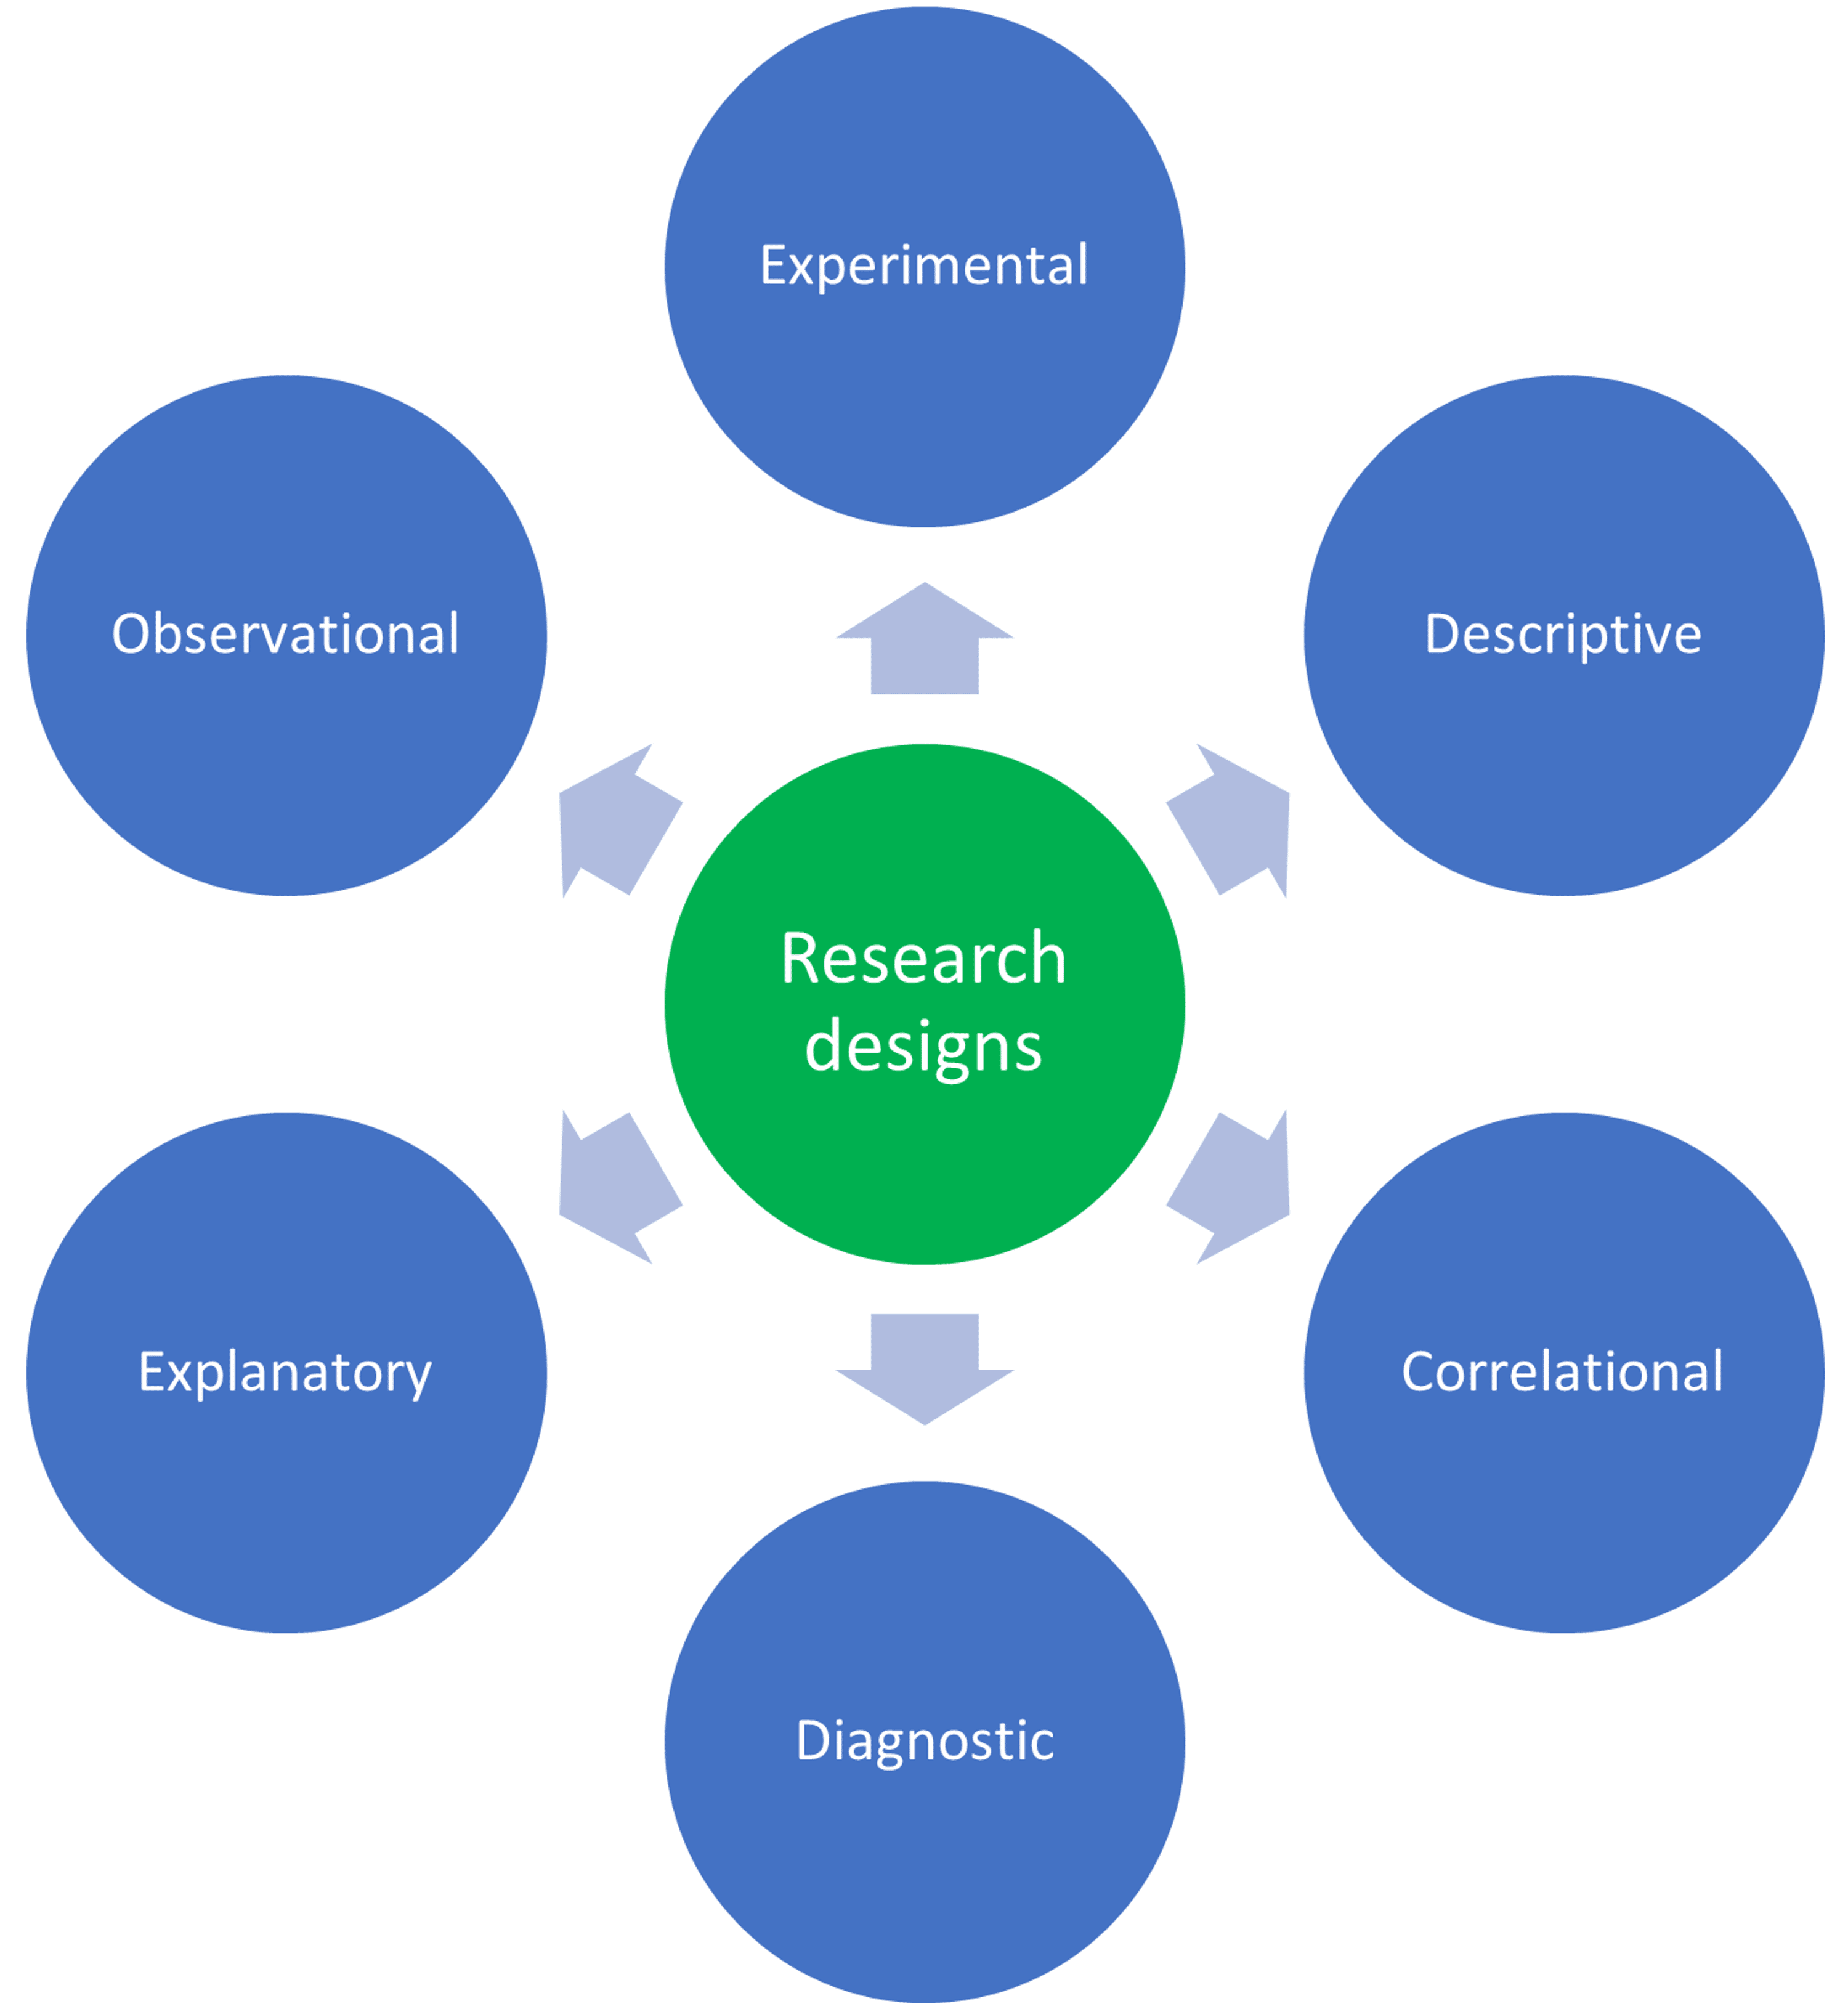 research design meaning according to authors